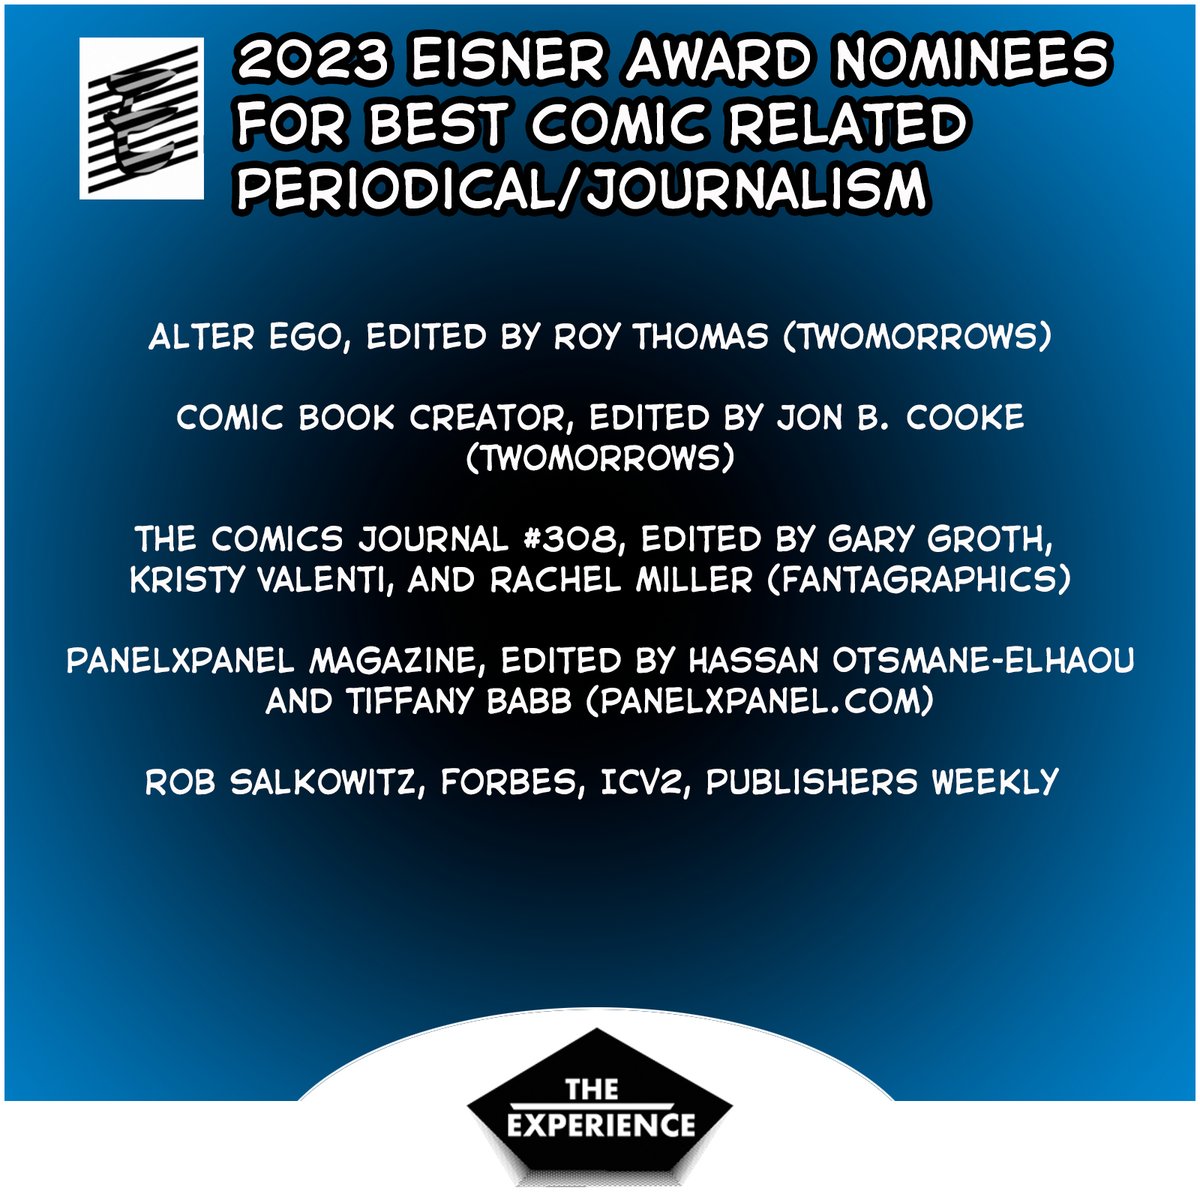 Congratulations to the Eisner Awards Nominees 2023 for Best Comics-Related Periodical/Journalism